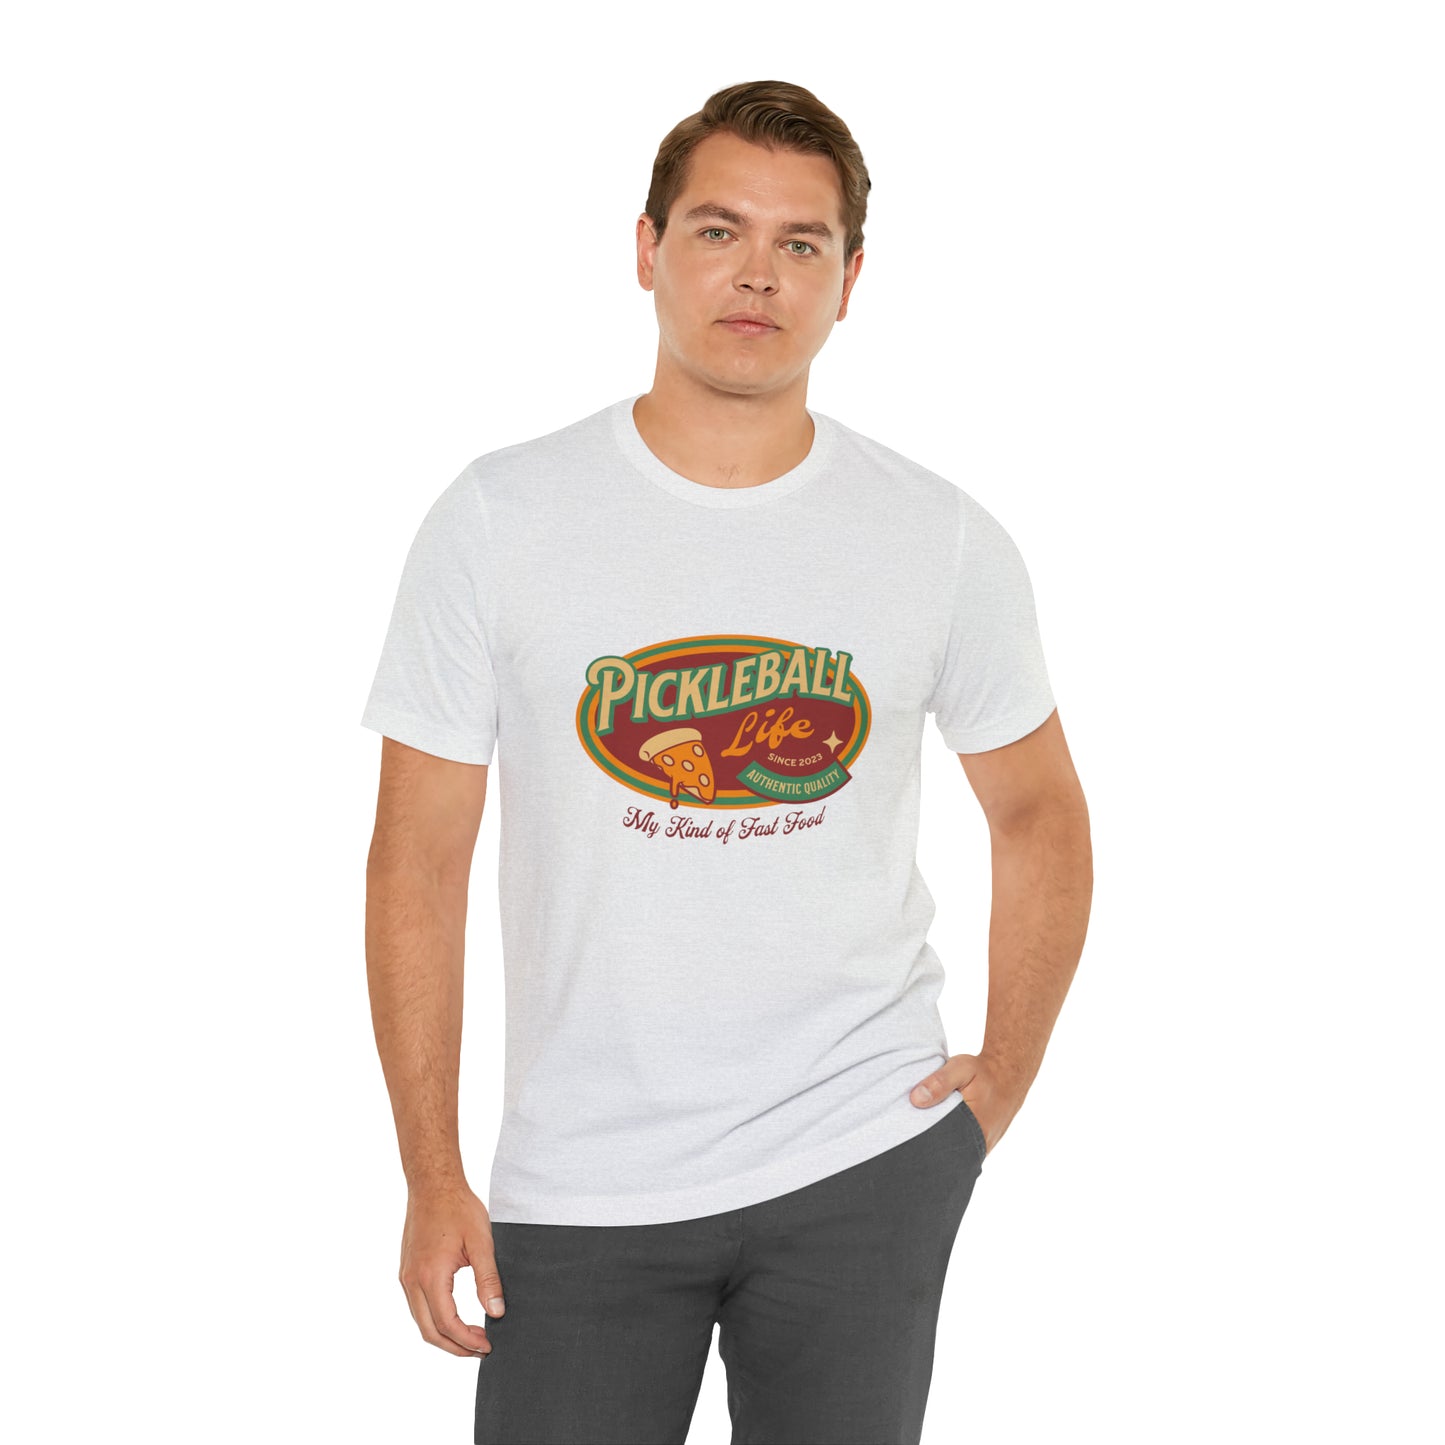 Pickleball: My Kind of Fast Food - Unisex Retro Cotton Tee with Pizza Graphic